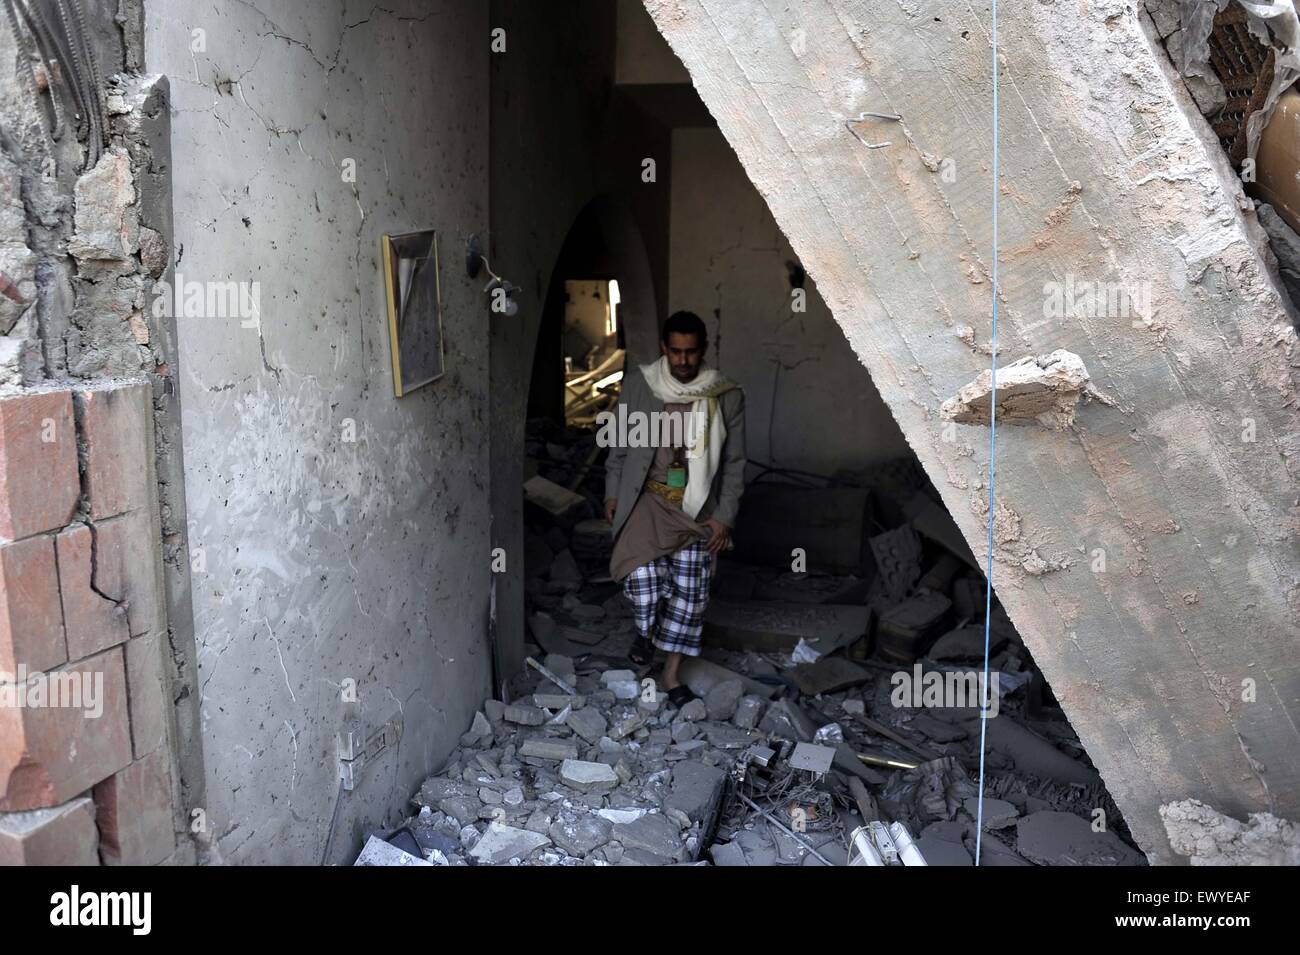 Sanaa, Yemen. 2nd July, 2015. A Yemeni man walks in a house destroyed in the airstrike in Sanaa, Yemen, on July 2, 2015. Airstrikes of the Saudi-led coalition forces hit the house of former Yemeni Prime Minister Faraj Said Bin Ghanem in Sanaa on Thursday, killing the family of a guard including three children and the parents. Faraj Said Bin Ghanem was the prime minister of Yemen from May 1997 to April 1998. Credit:  Hani Ali/Xinhua/Alamy Live News Stock Photo